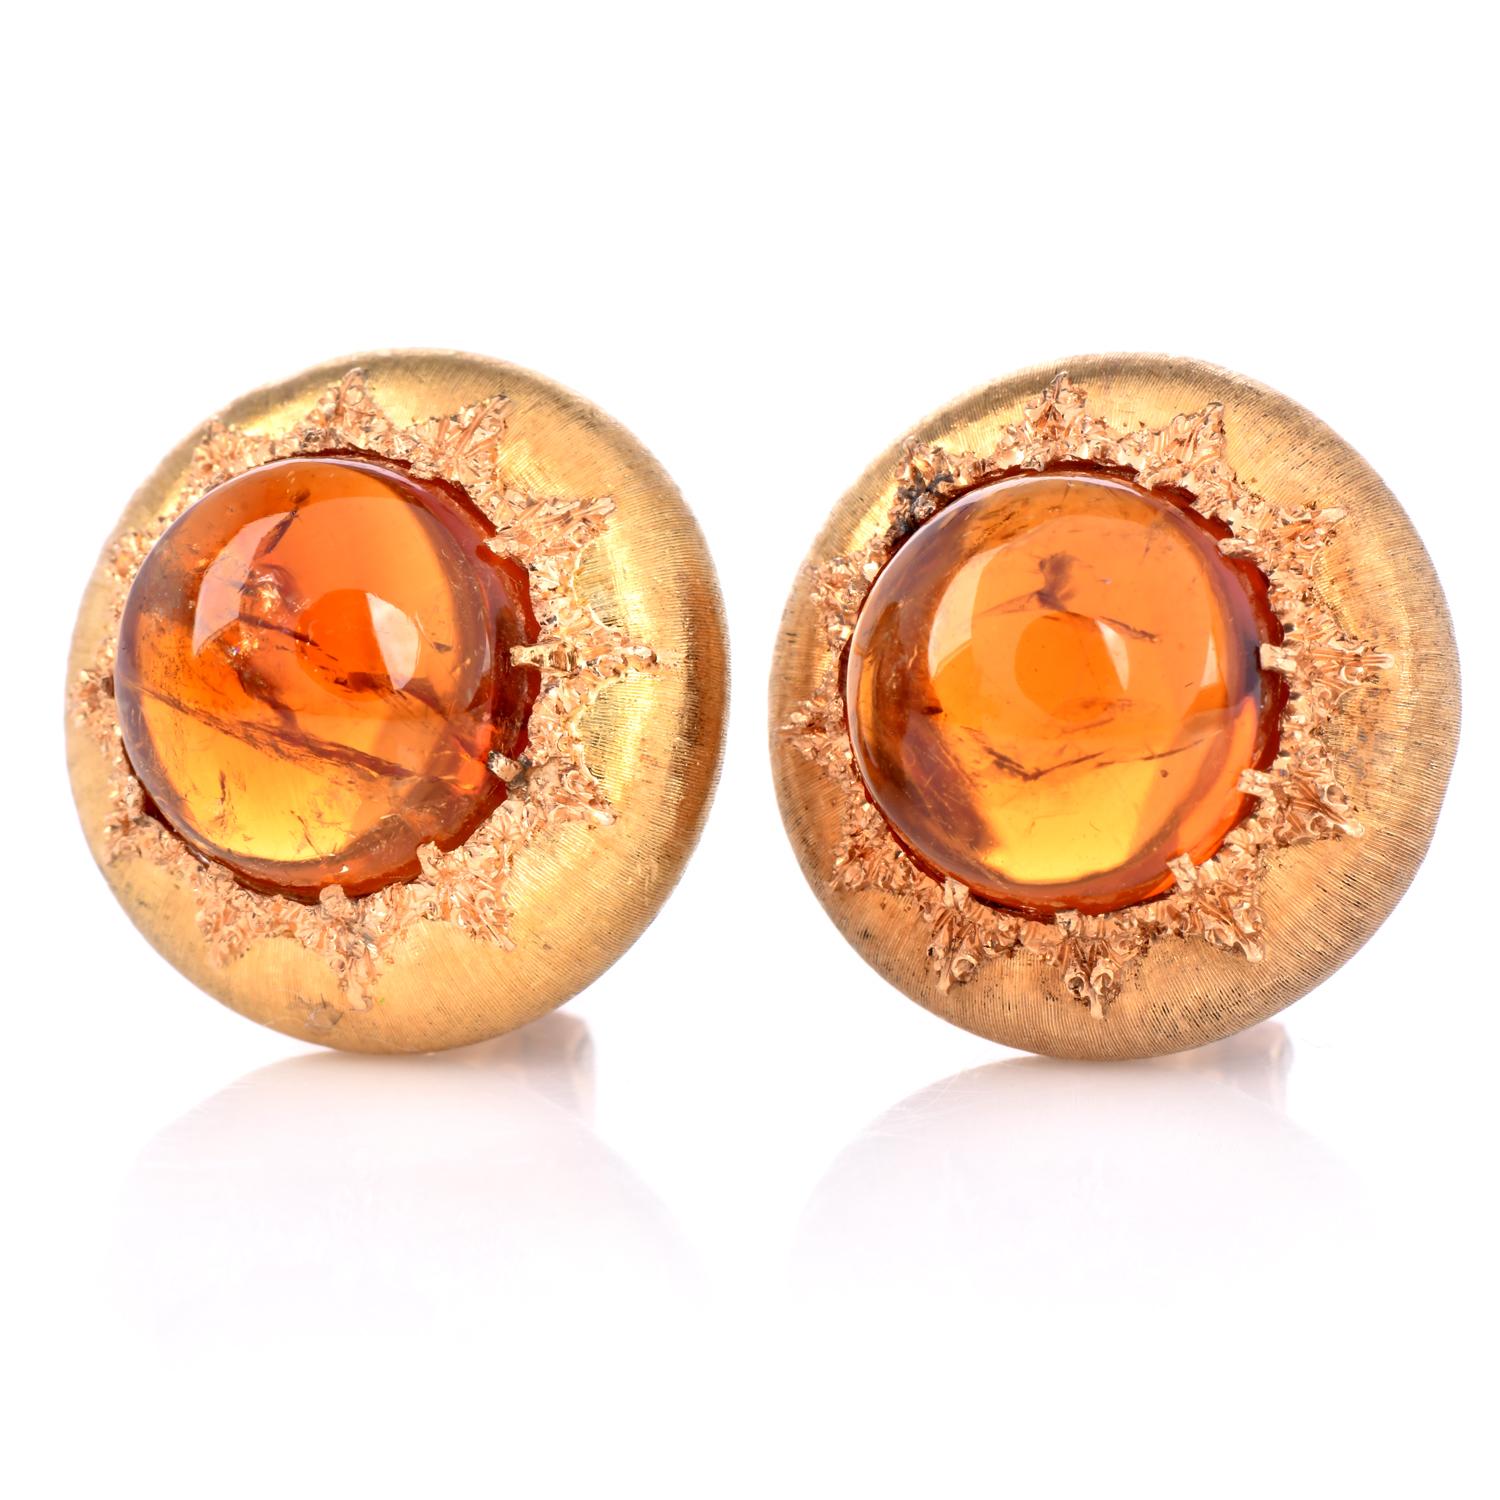 Presenting Buccellati earrings made in 18K solid Italian Yellow gold with Amber crystal radiance. Elevate your outfits with a gorgeous amber glow by incorporating this pair of Buccellati earrings. Each earring features a rich and vibrant Amber stone